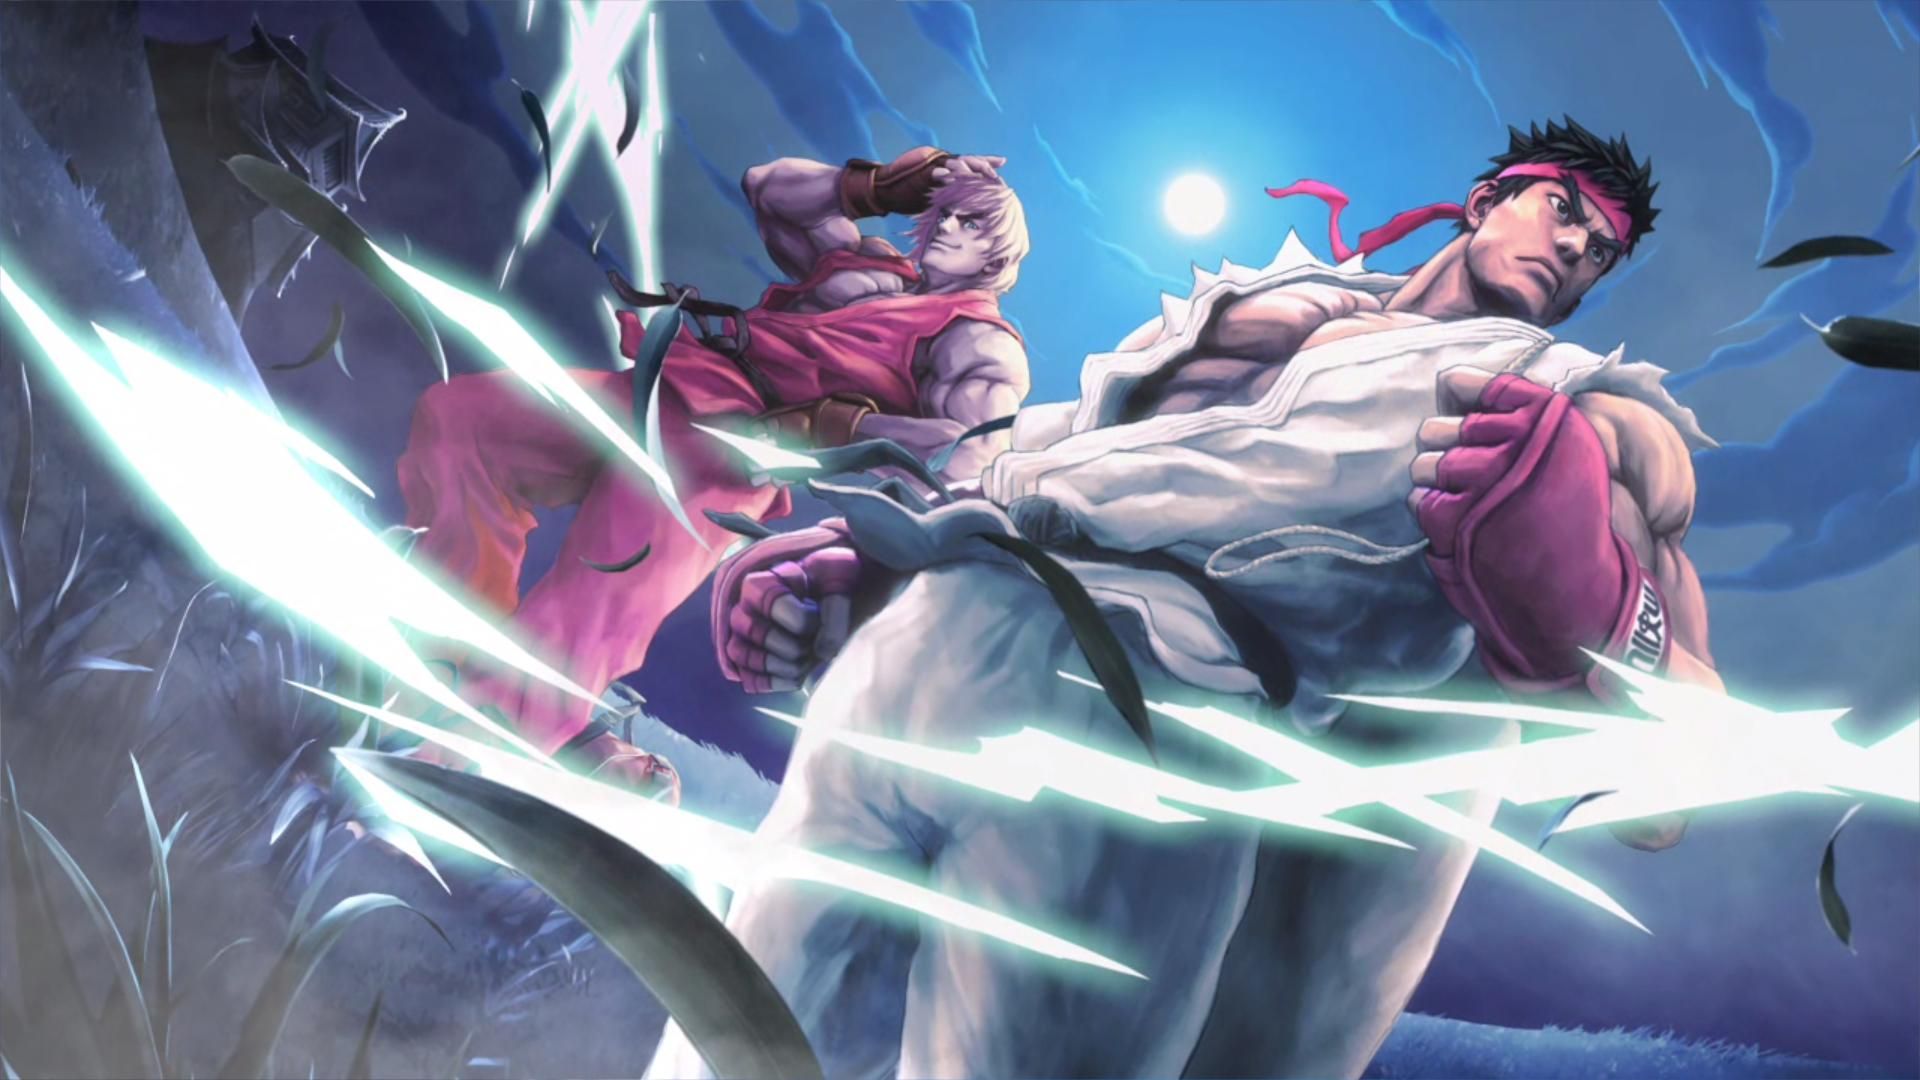 Street Fighter Wallpaper FHDq Pictures